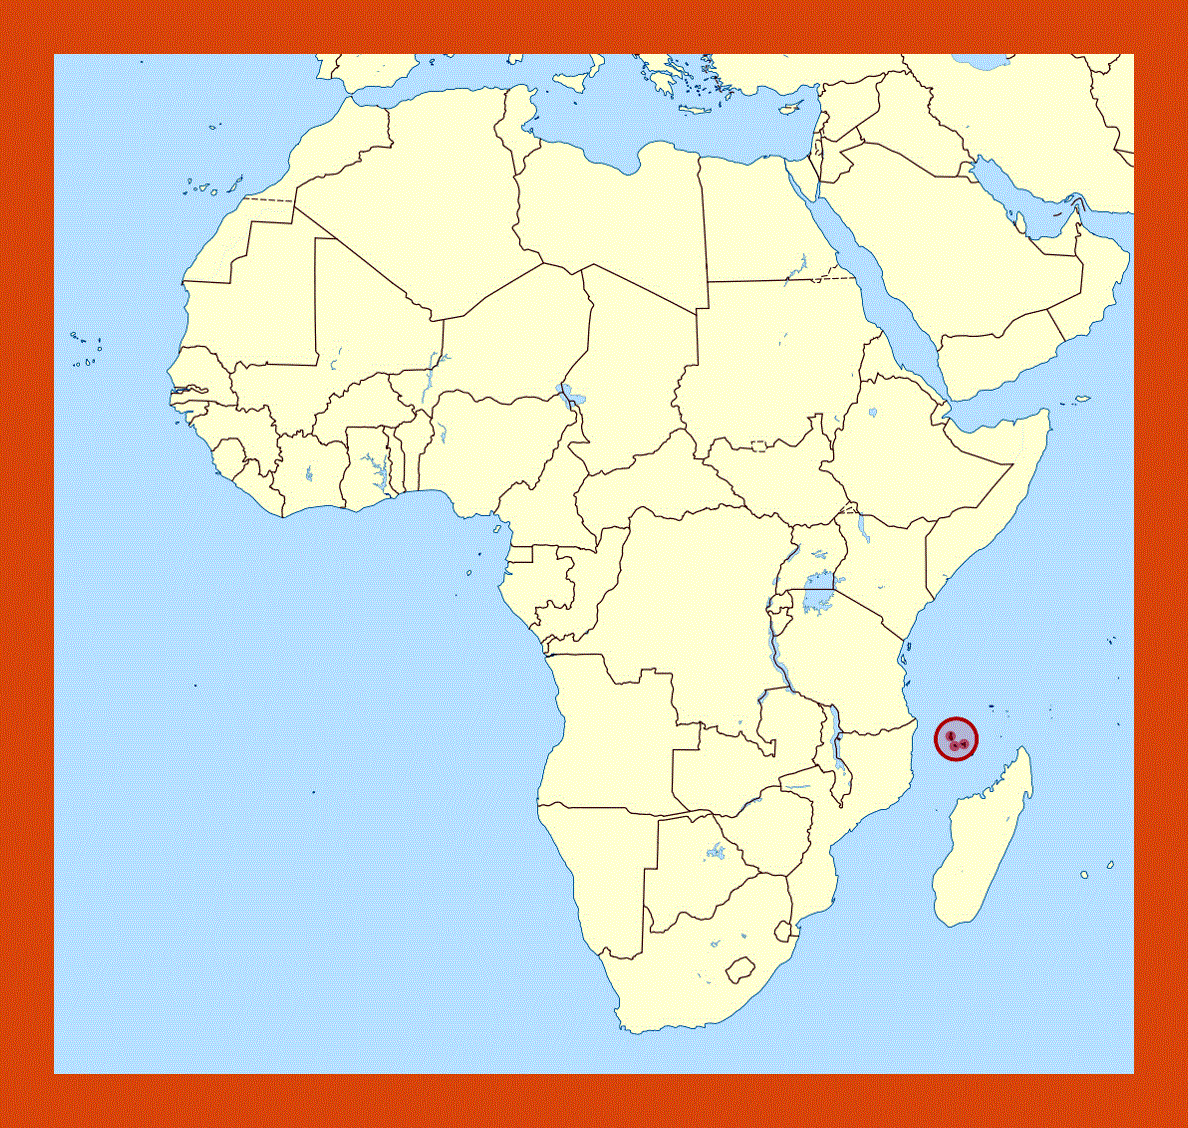 Location map of Comoros in Africa